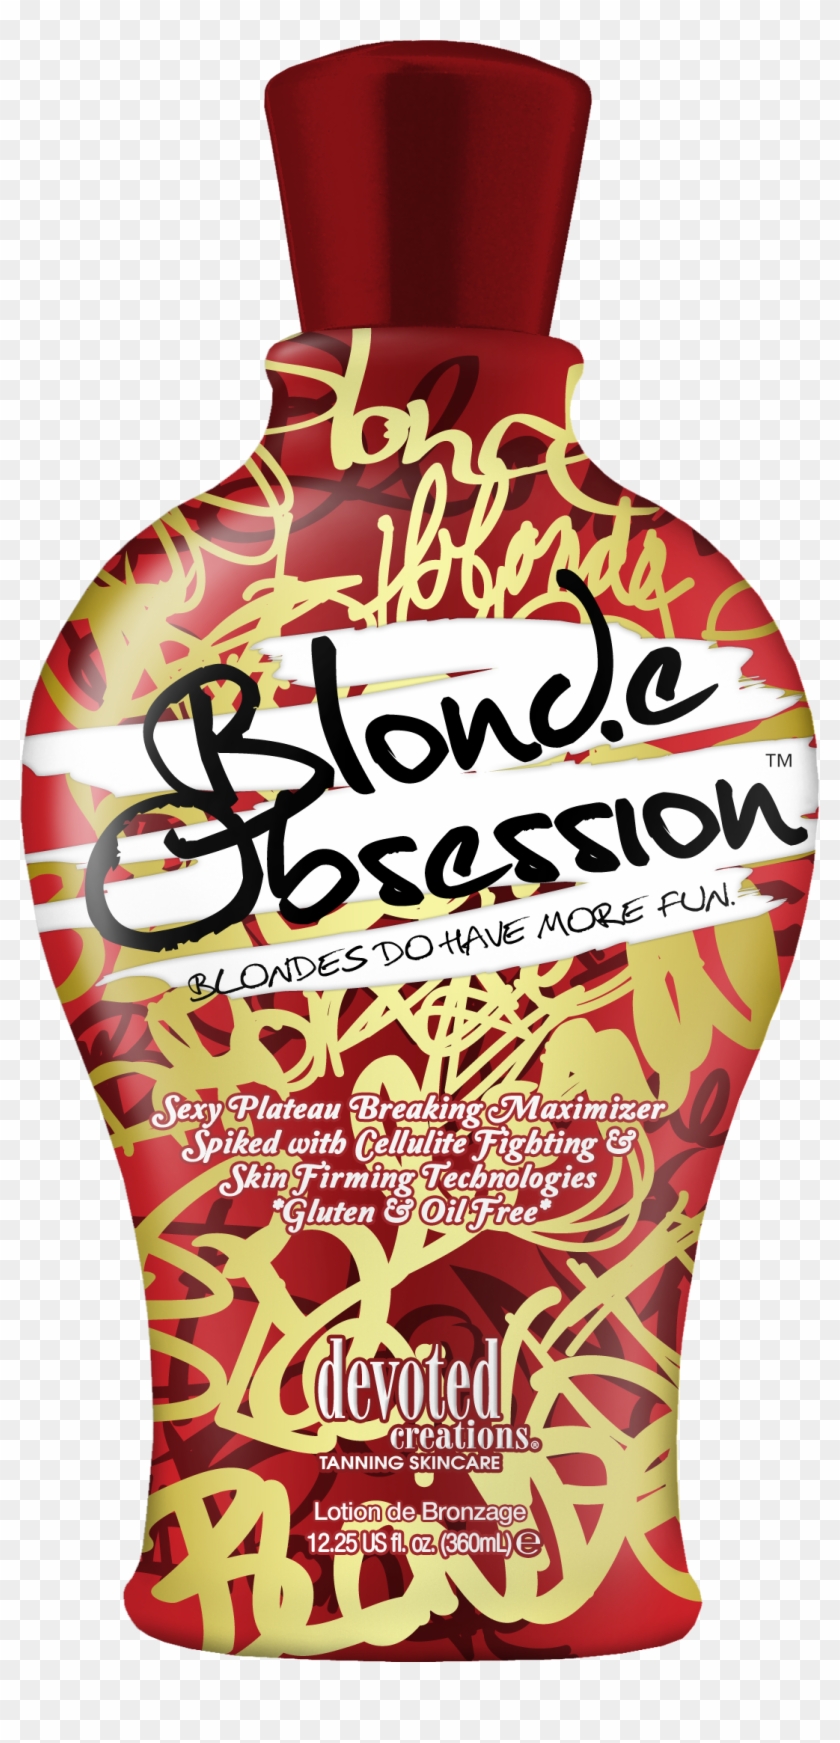 Blonde Obsession™ - Blonde Obsession Tanning Lotion #1694745